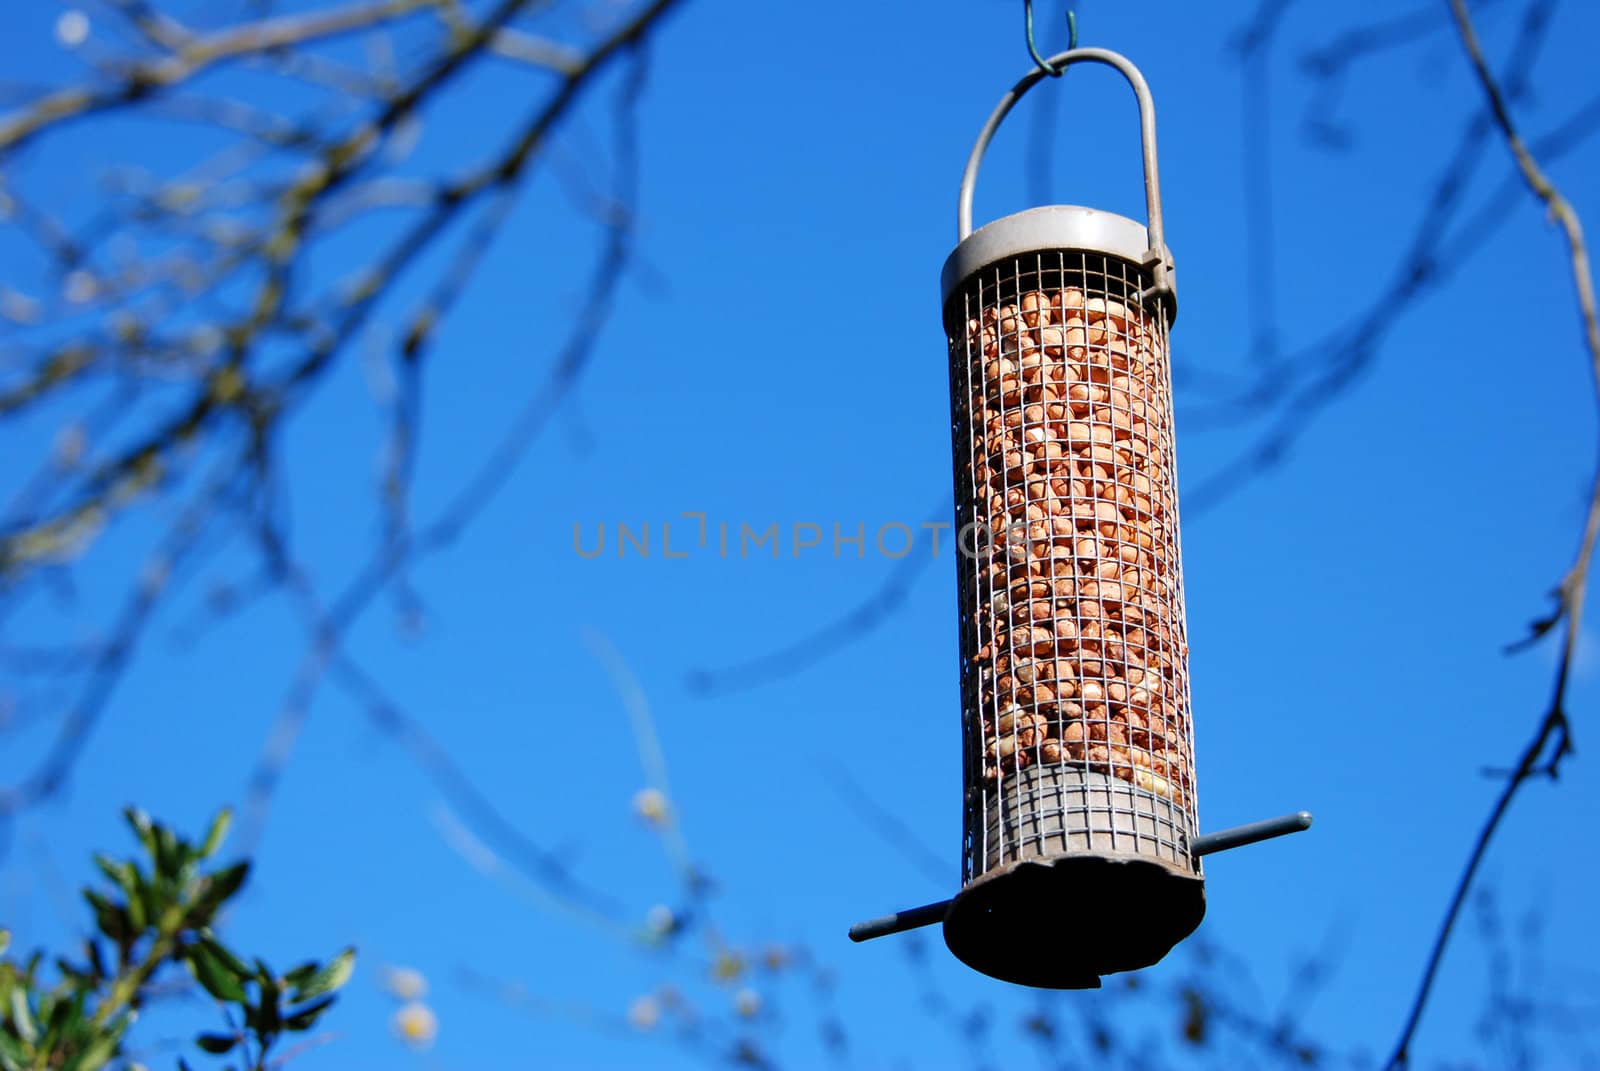 Bird feeder full of peanuts hanging from a tree branch against a blue sky